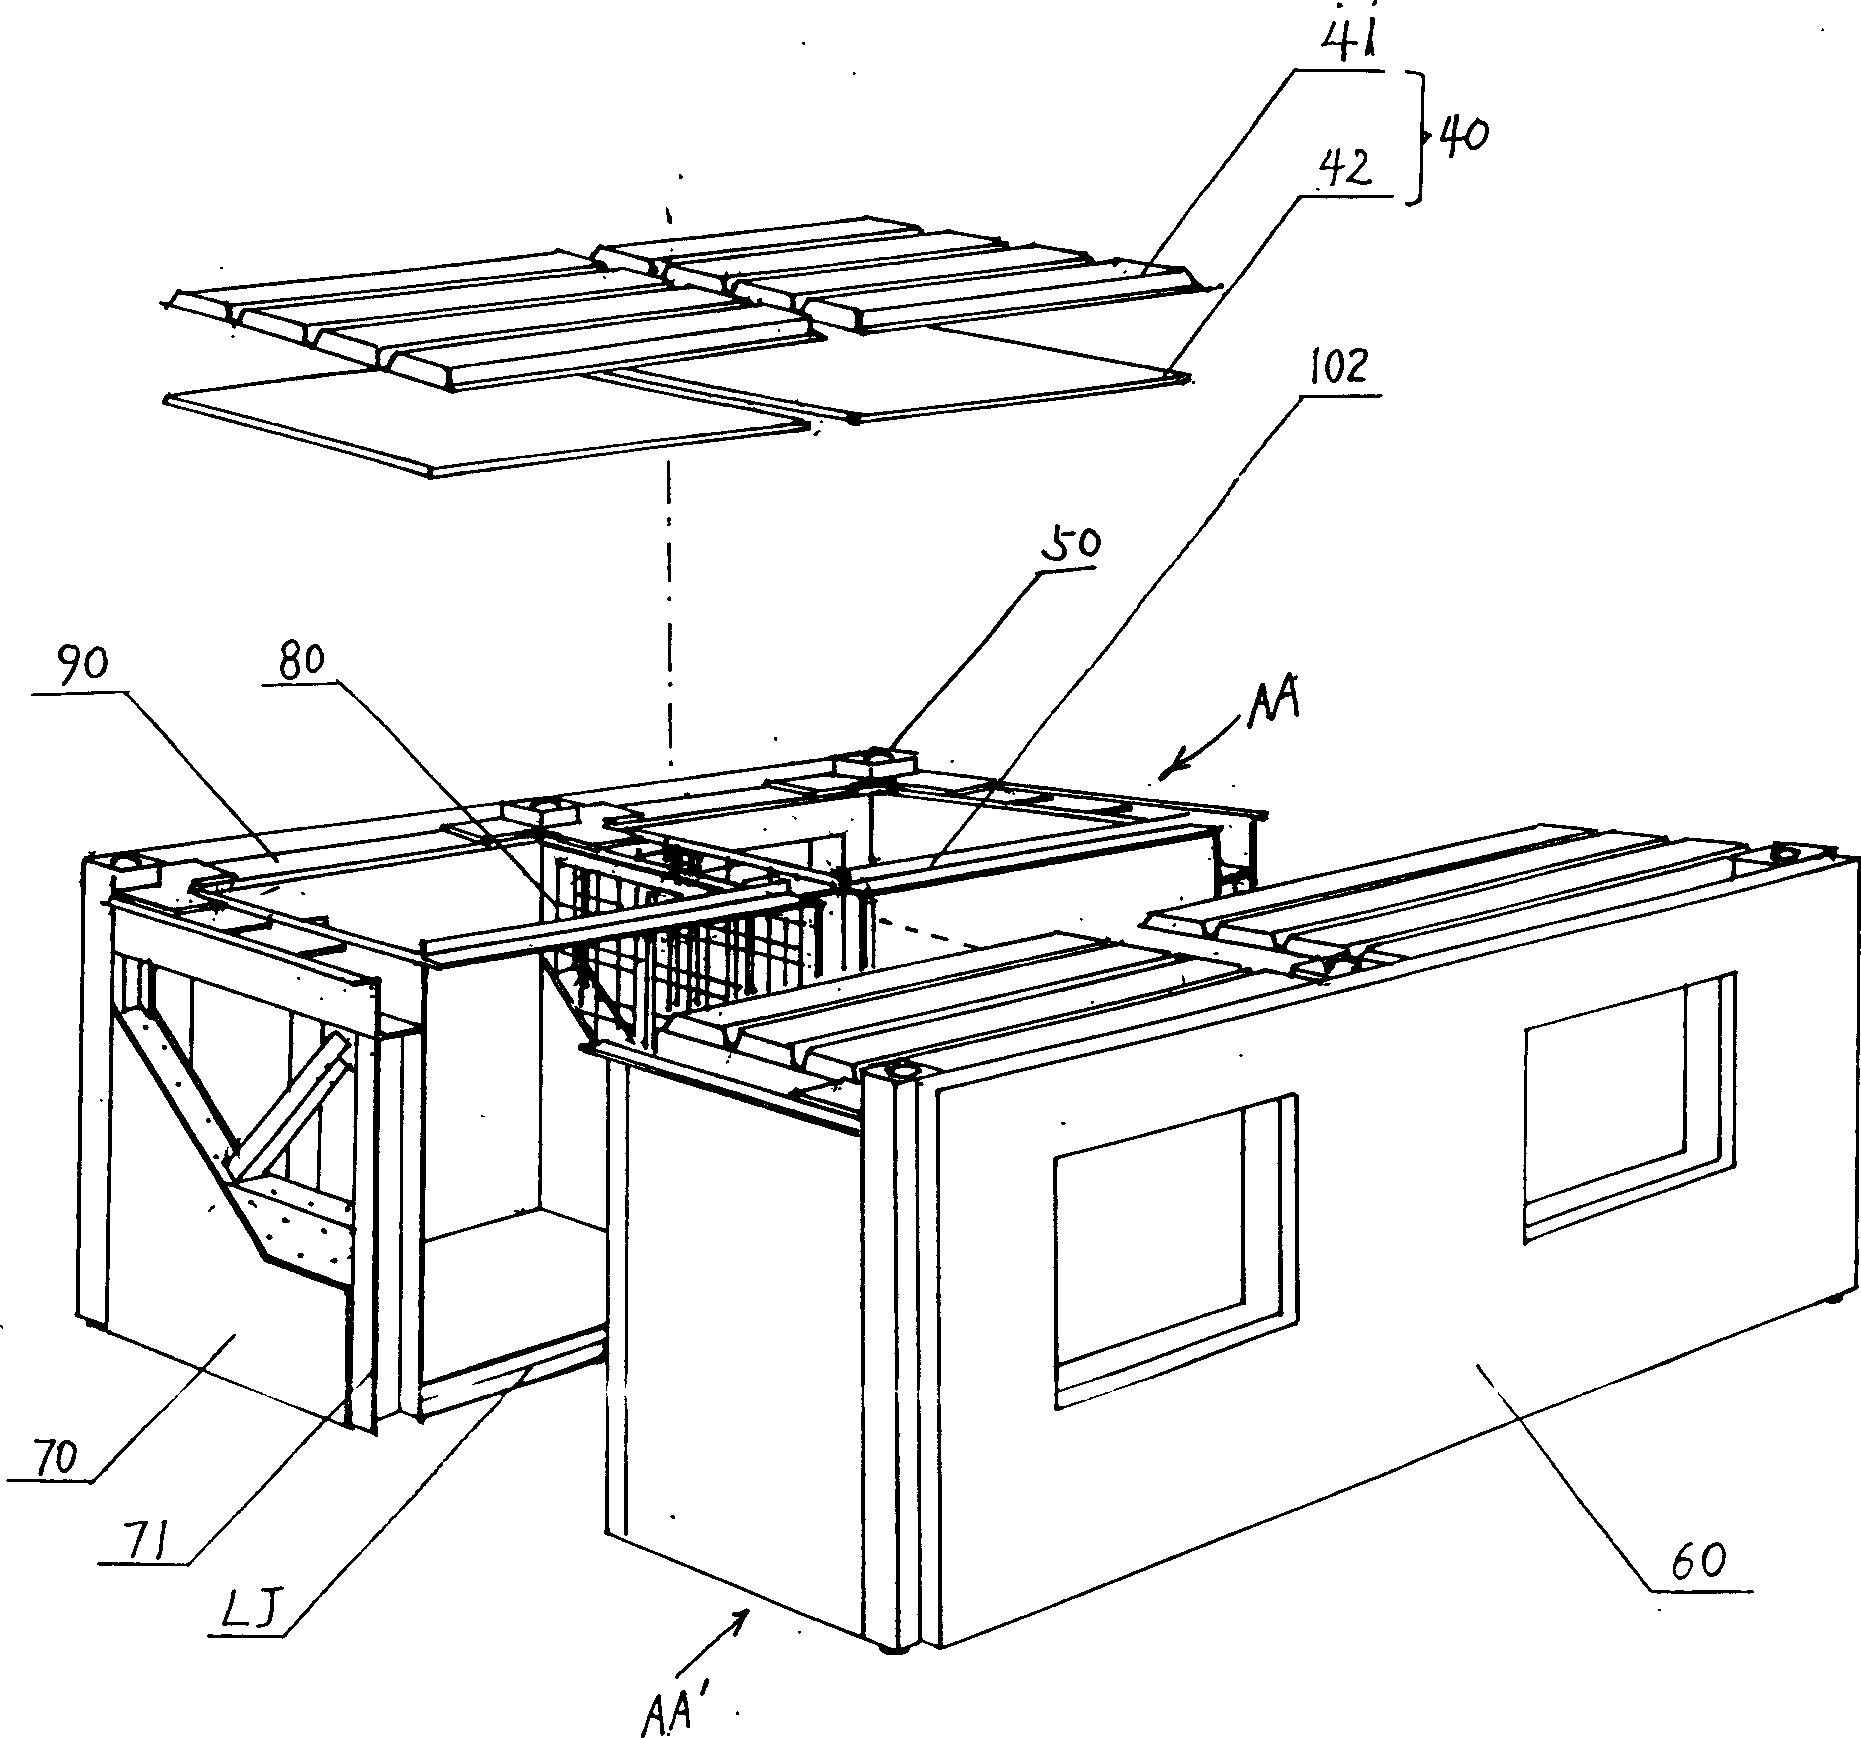 Box shaped house model of construction and fabricating method